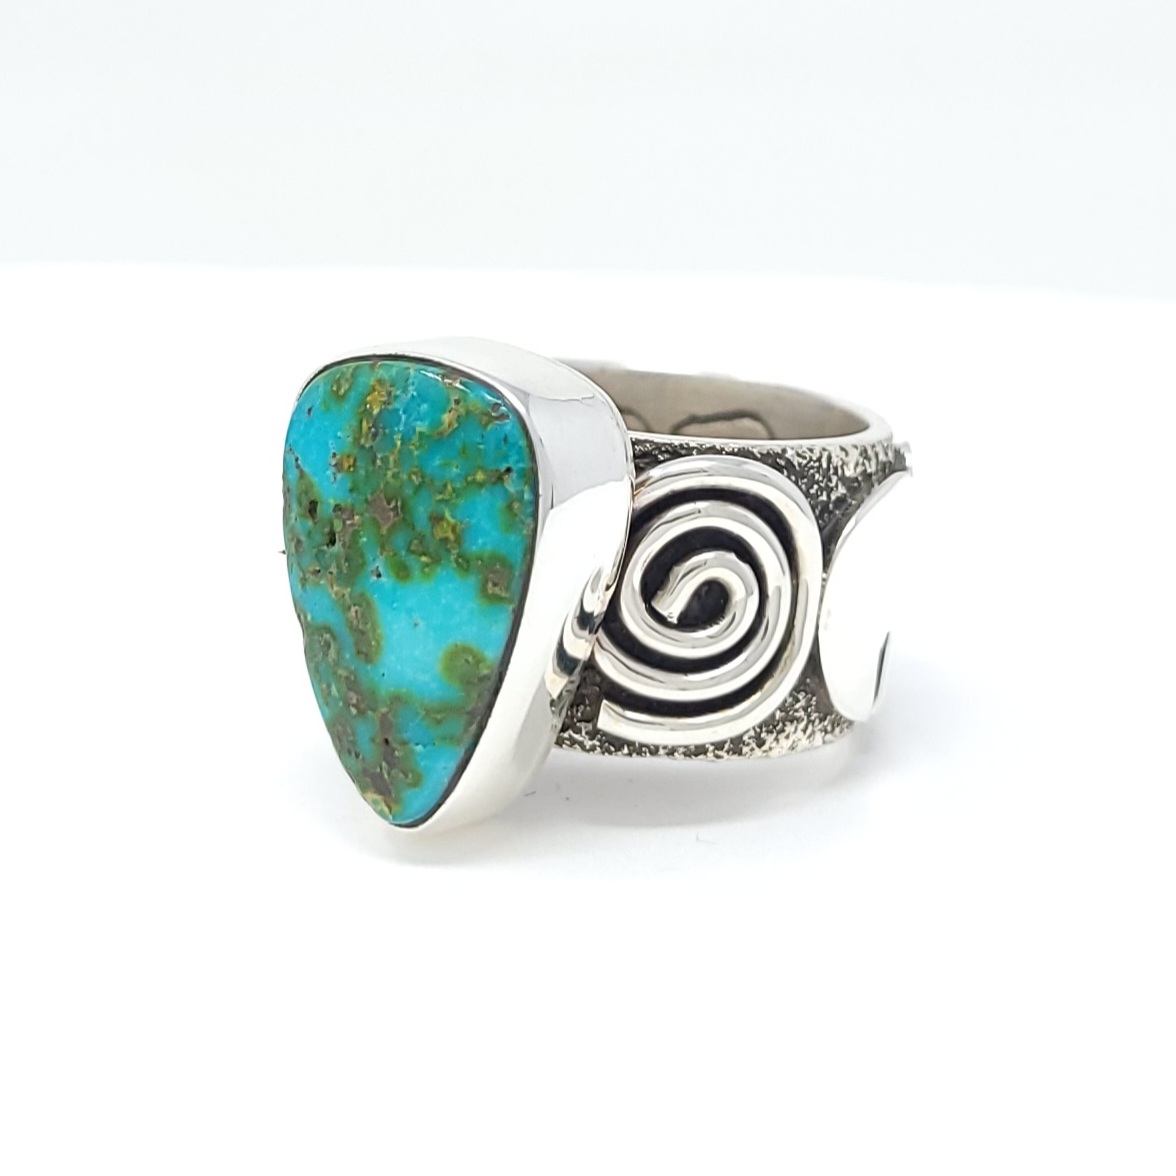 Alex Sanchez Navajo Sterling Silver Handmade Classic Ring Sonoran Gold Turquoise